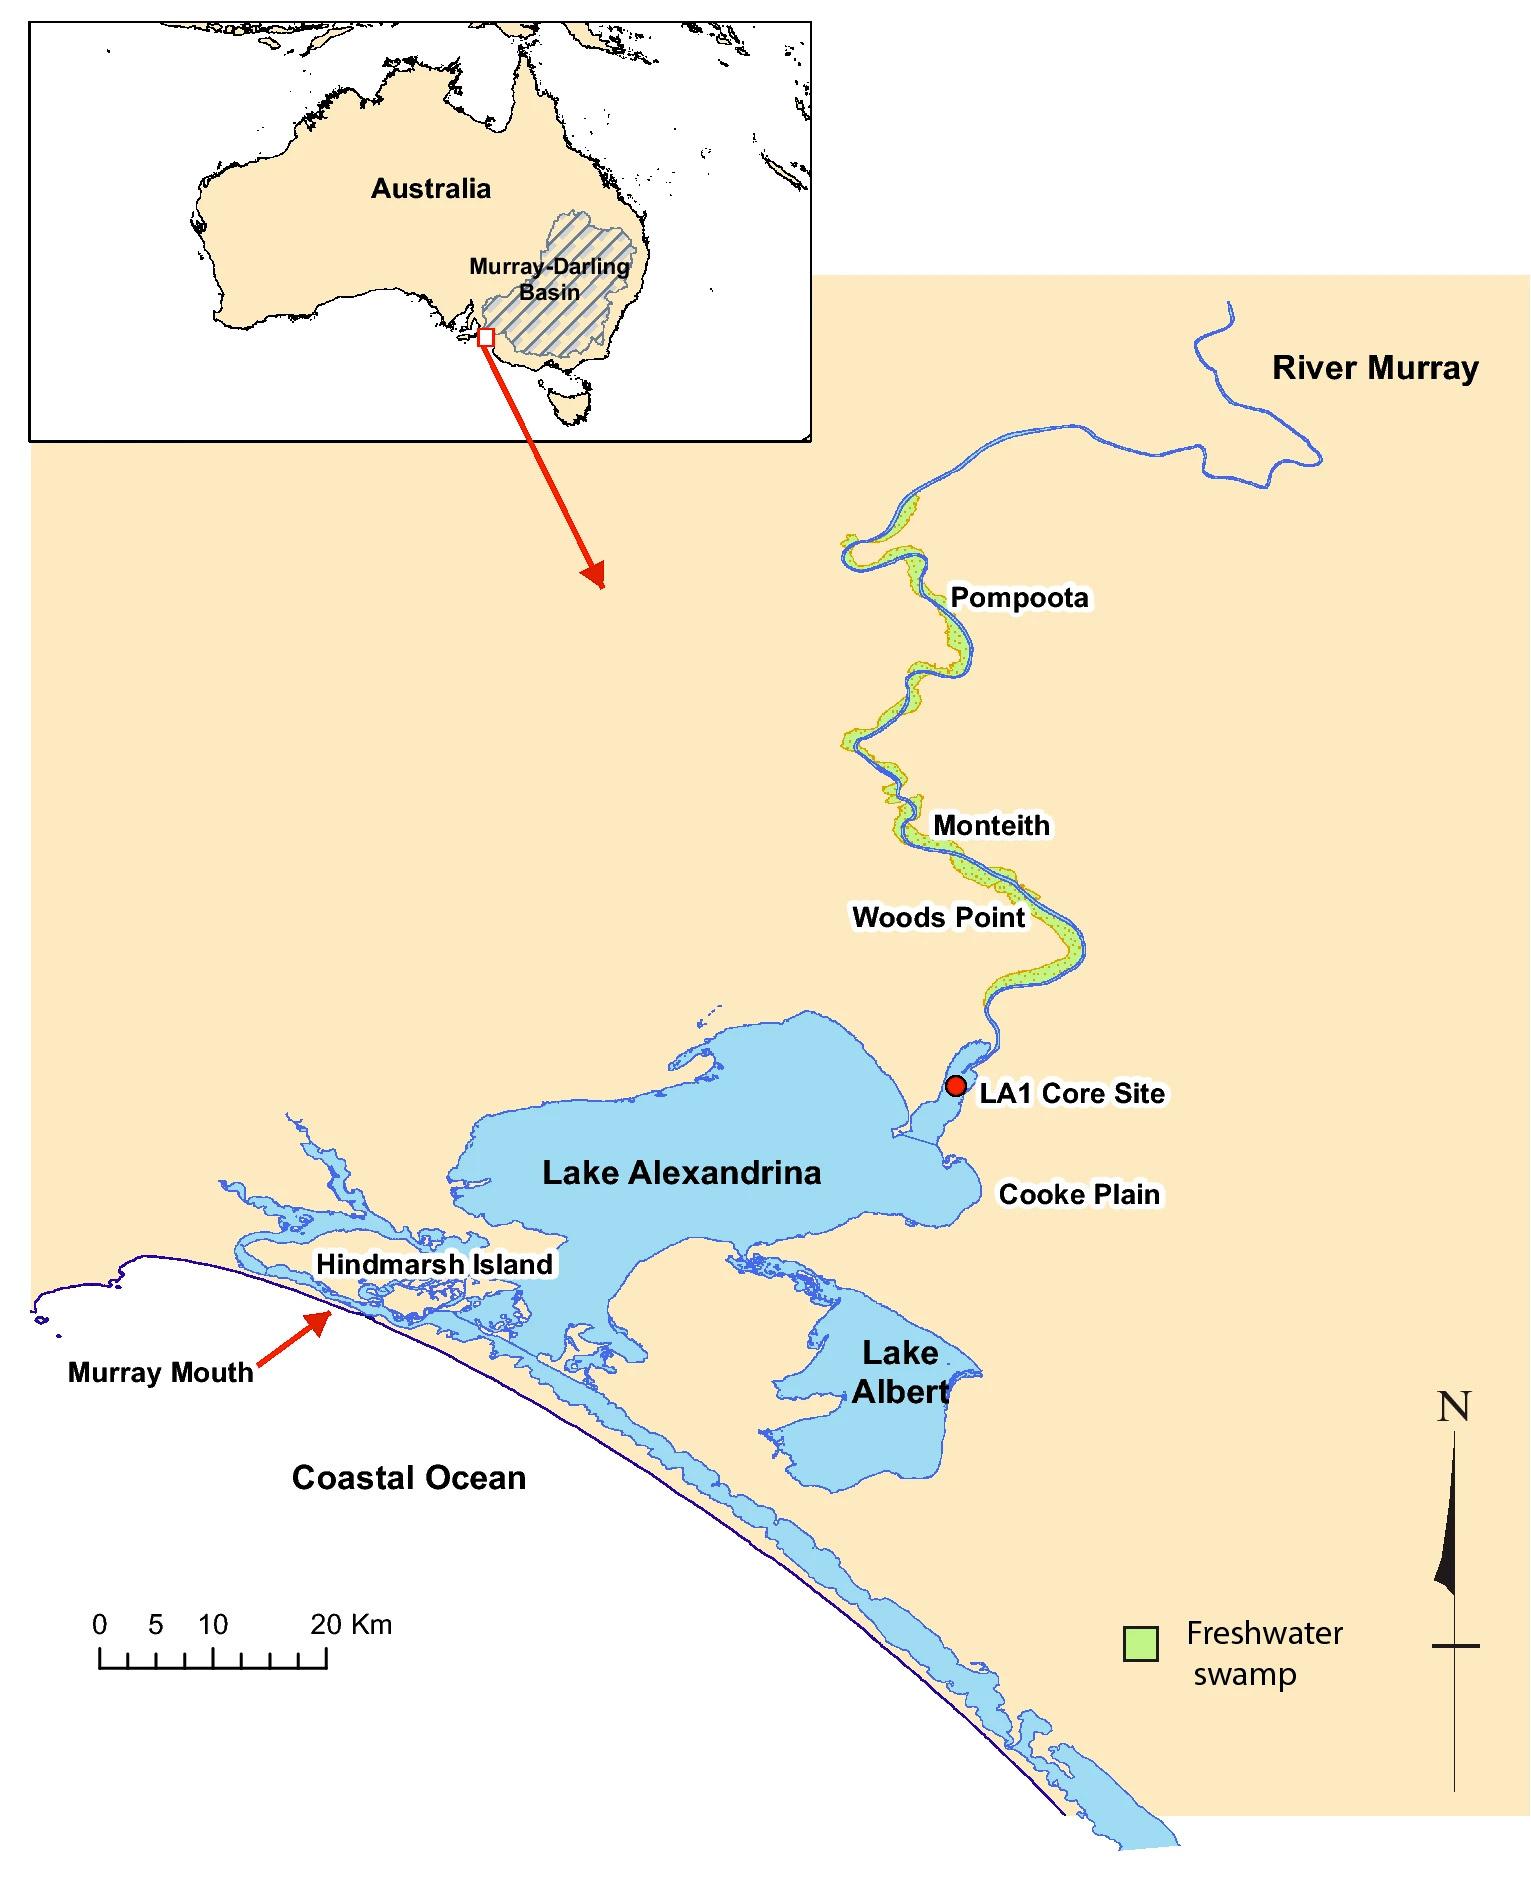 The lower River Murray and sites mentioned in the text. Monteith is the location of core and cone penetrometer research reported in Ref2